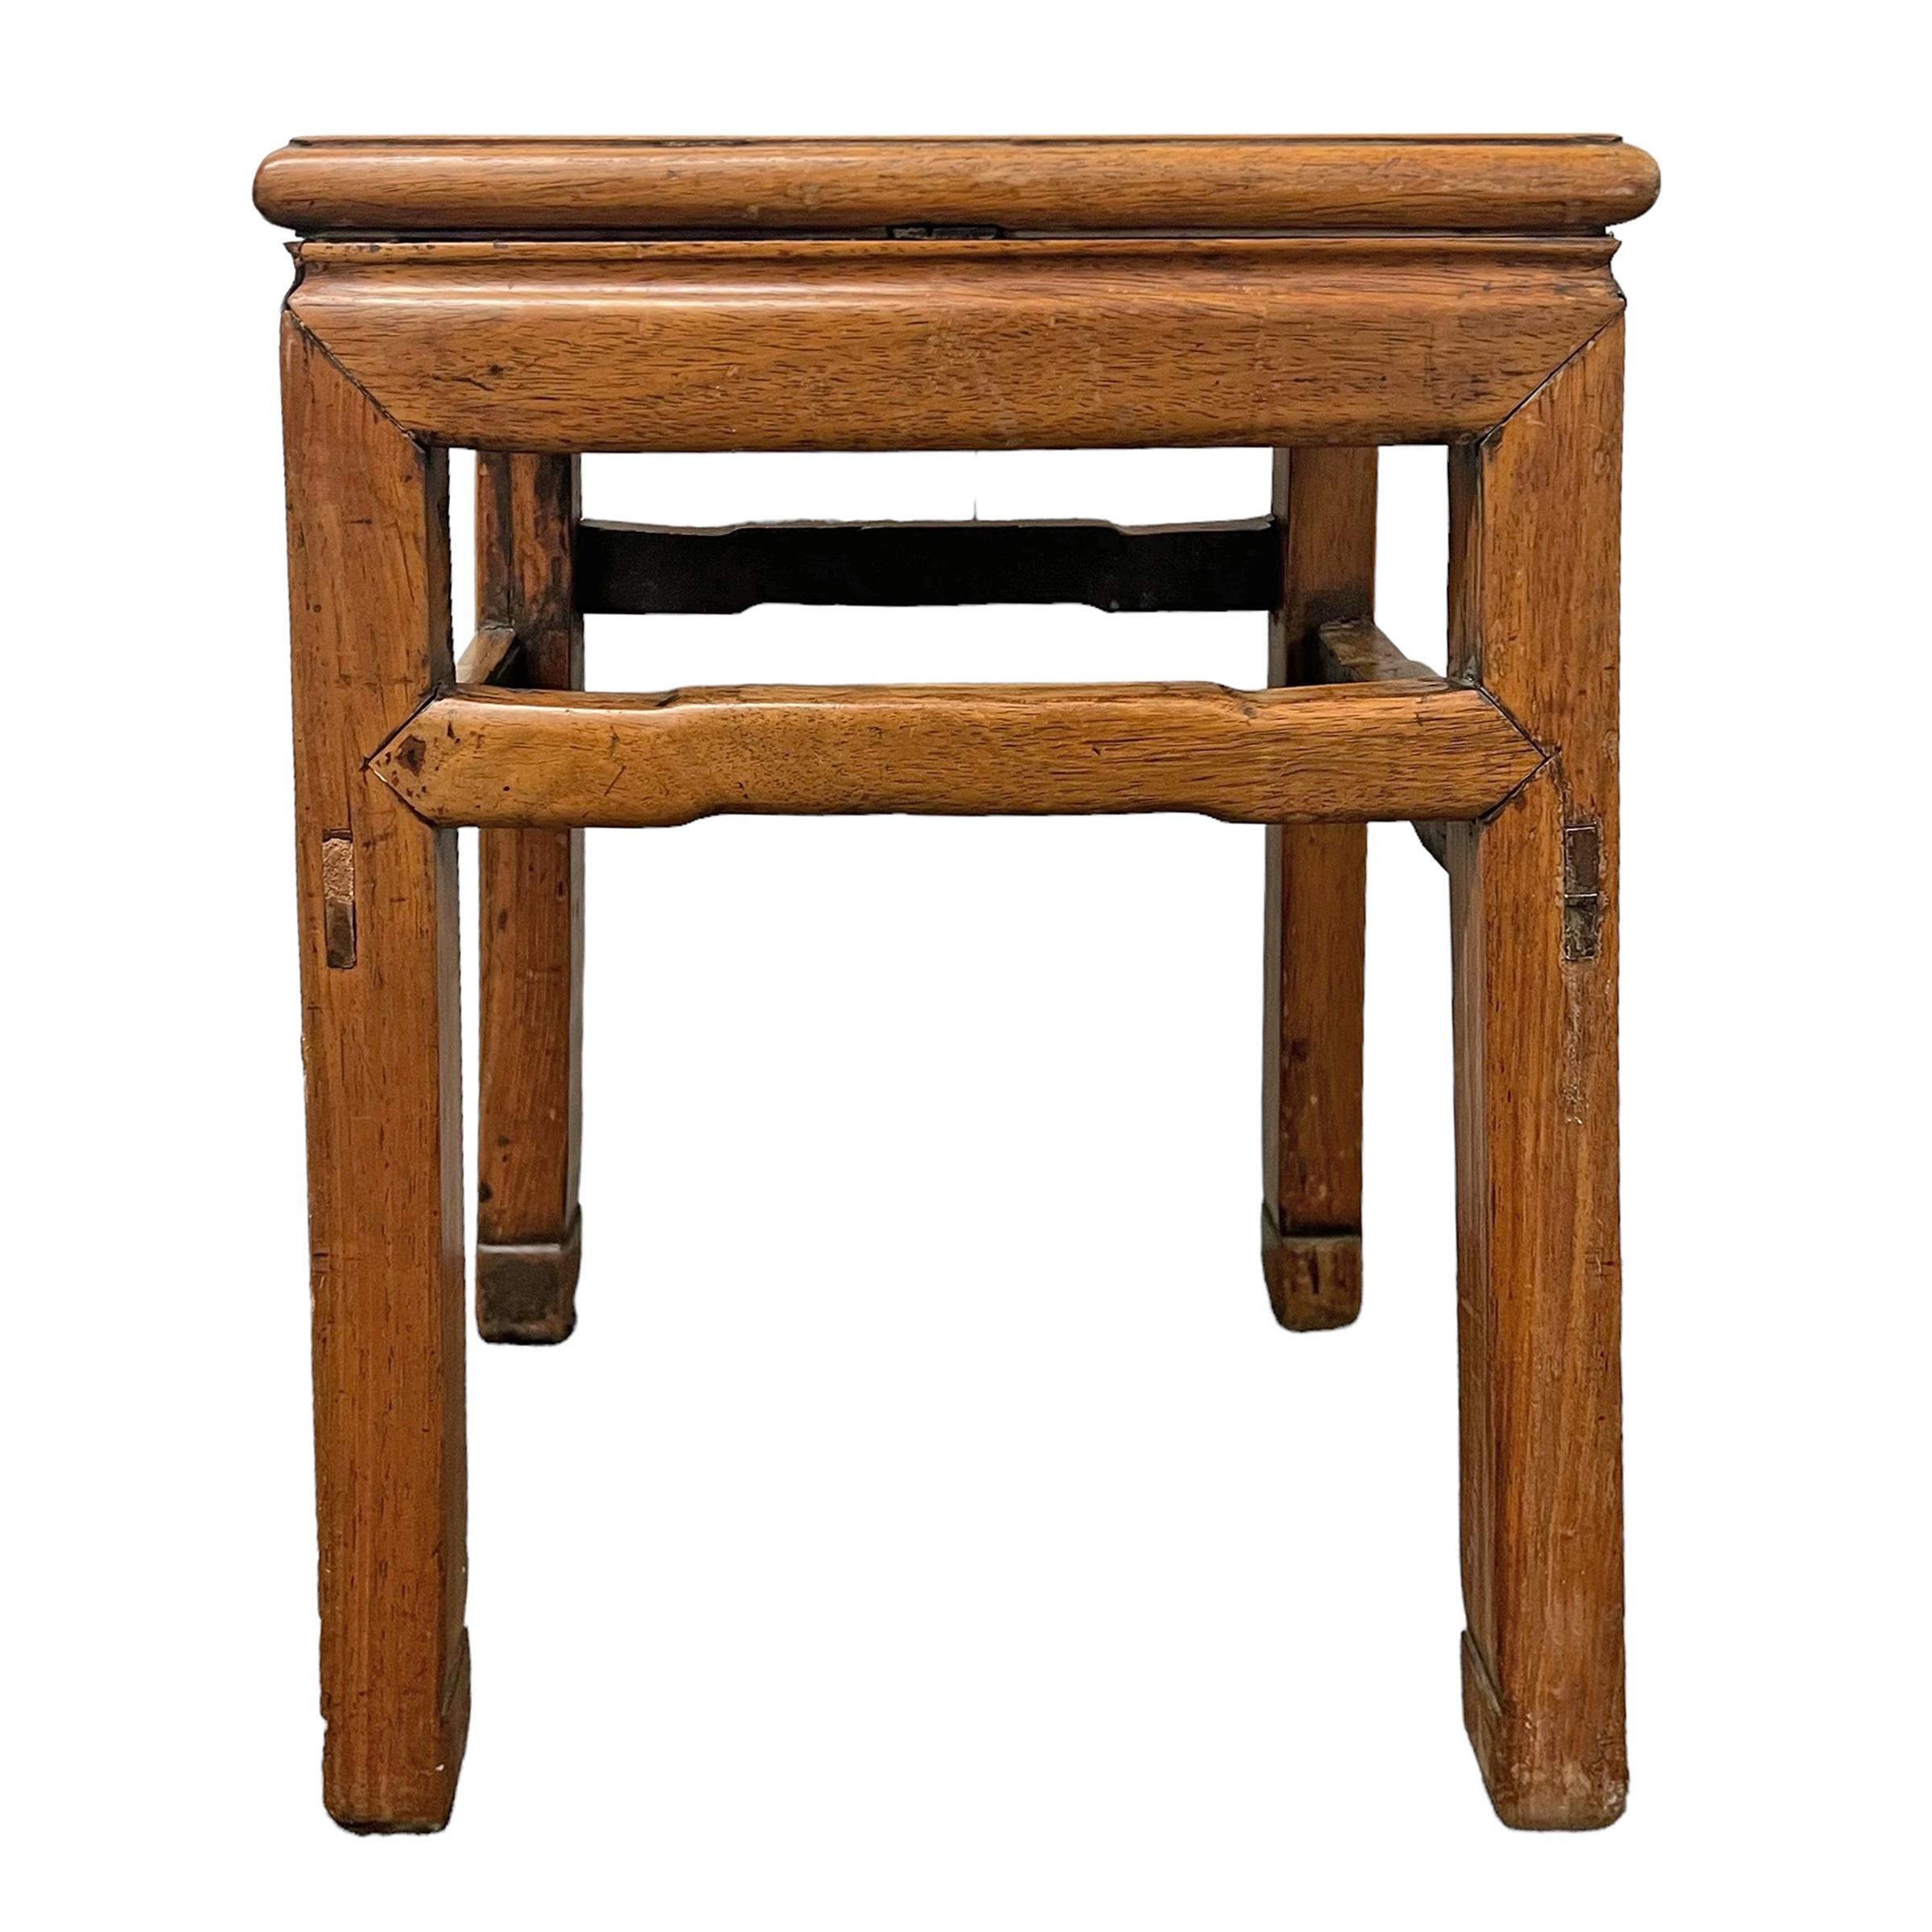 Hardwood Late 17th/Early 18th Century Chinese Huanghuali Scholar's Stool For Sale